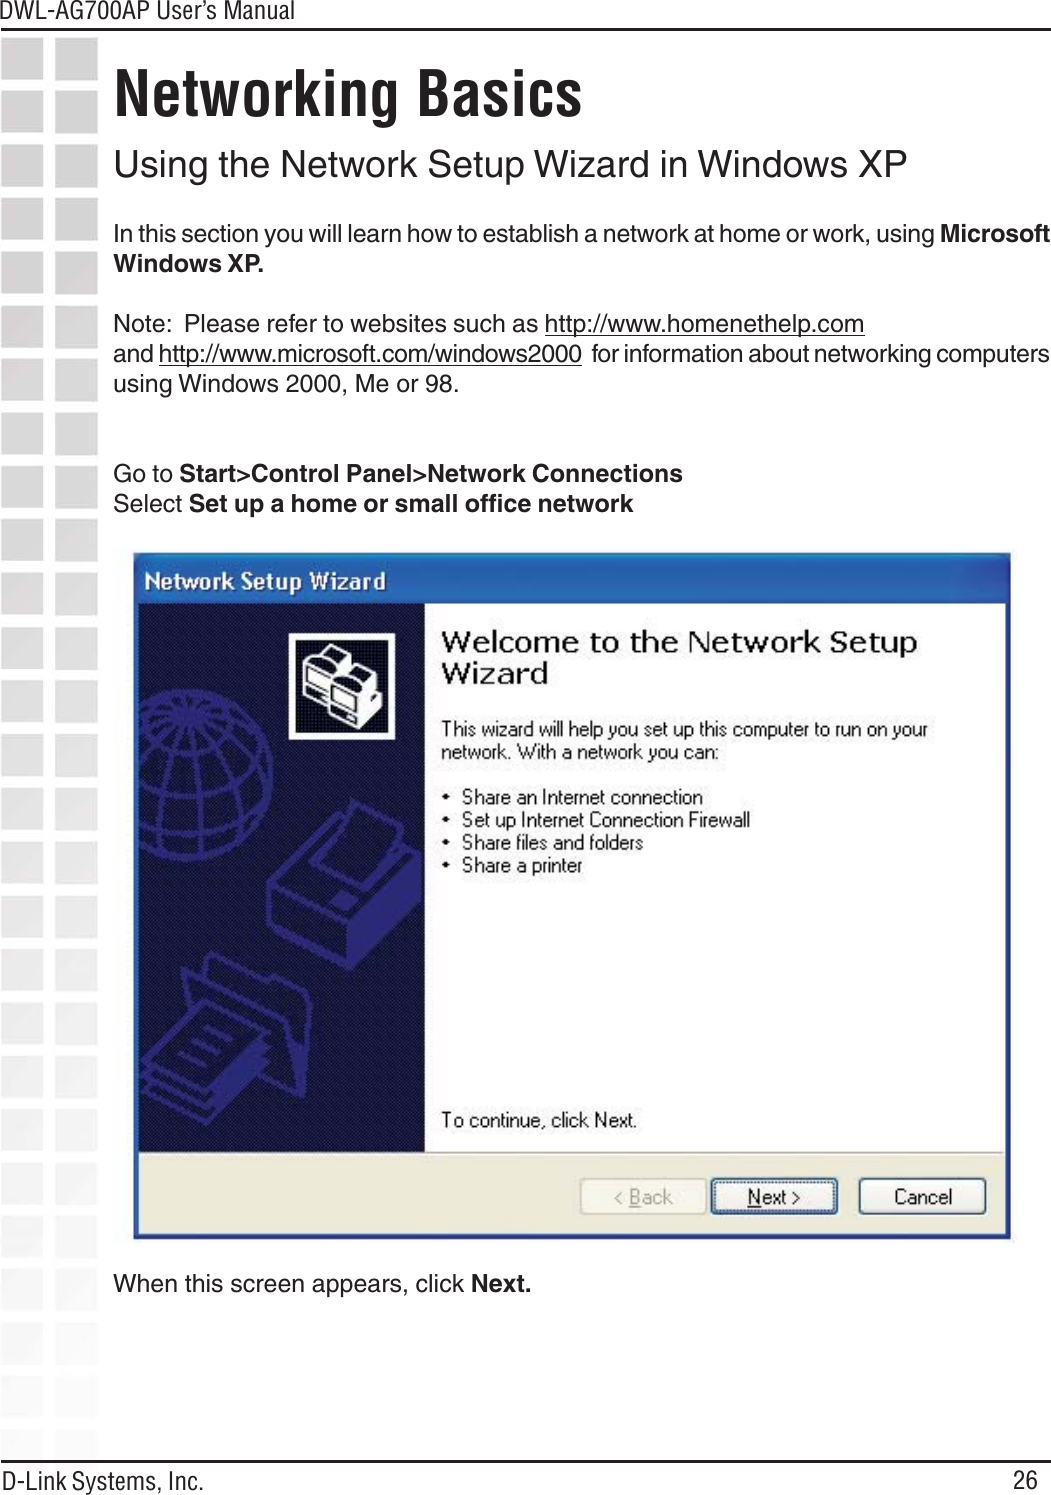 26DWL-AG700AP User’s ManualD-Link Systems, Inc.Using the Network Setup Wizard in Windows XPIn this section you will learn how to establish a network at home or work, using MicrosoftWindows XP.Note:  Please refer to websites such as http://www.homenethelp.comand http://www.microsoft.com/windows2000  for information about networking computersusing Windows 2000, Me or 98.Go to Start&gt;Control Panel&gt;Network ConnectionsSelect Set up a home or small office networkNetworking BasicsWhen this screen appears, click Next.